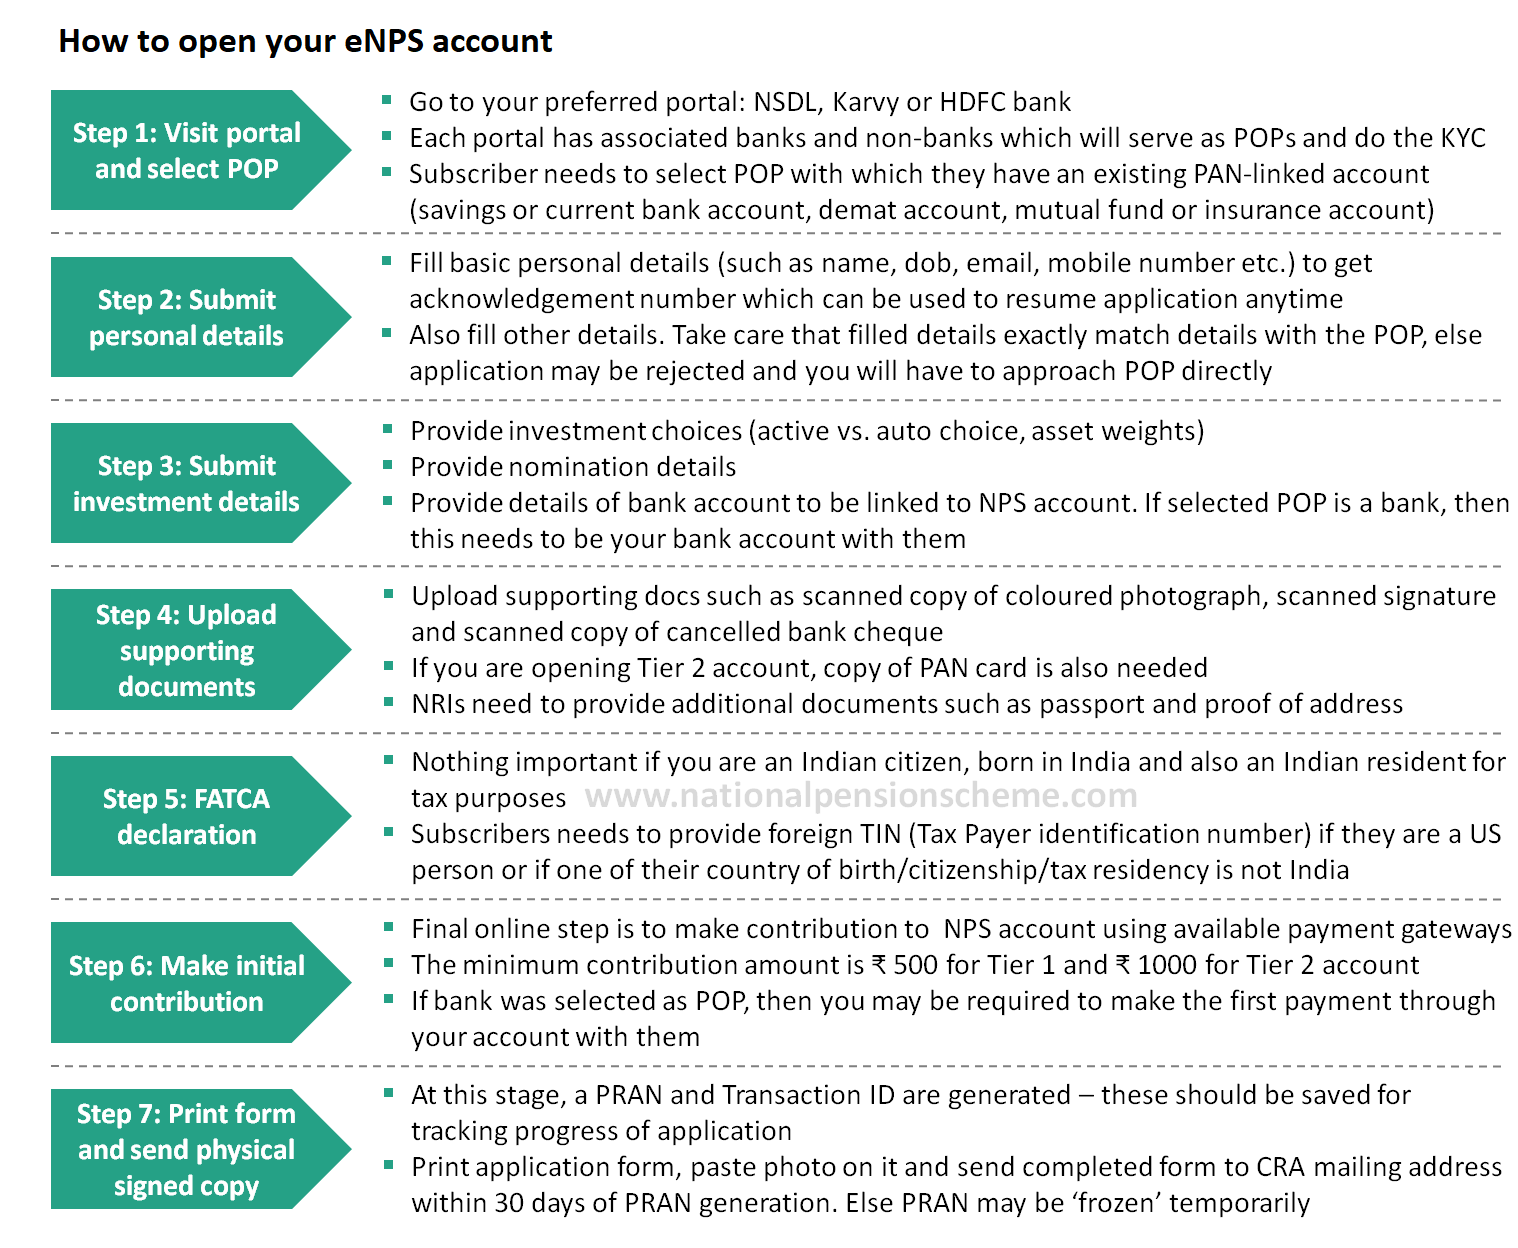 A list of steps for opening the eNPS account online